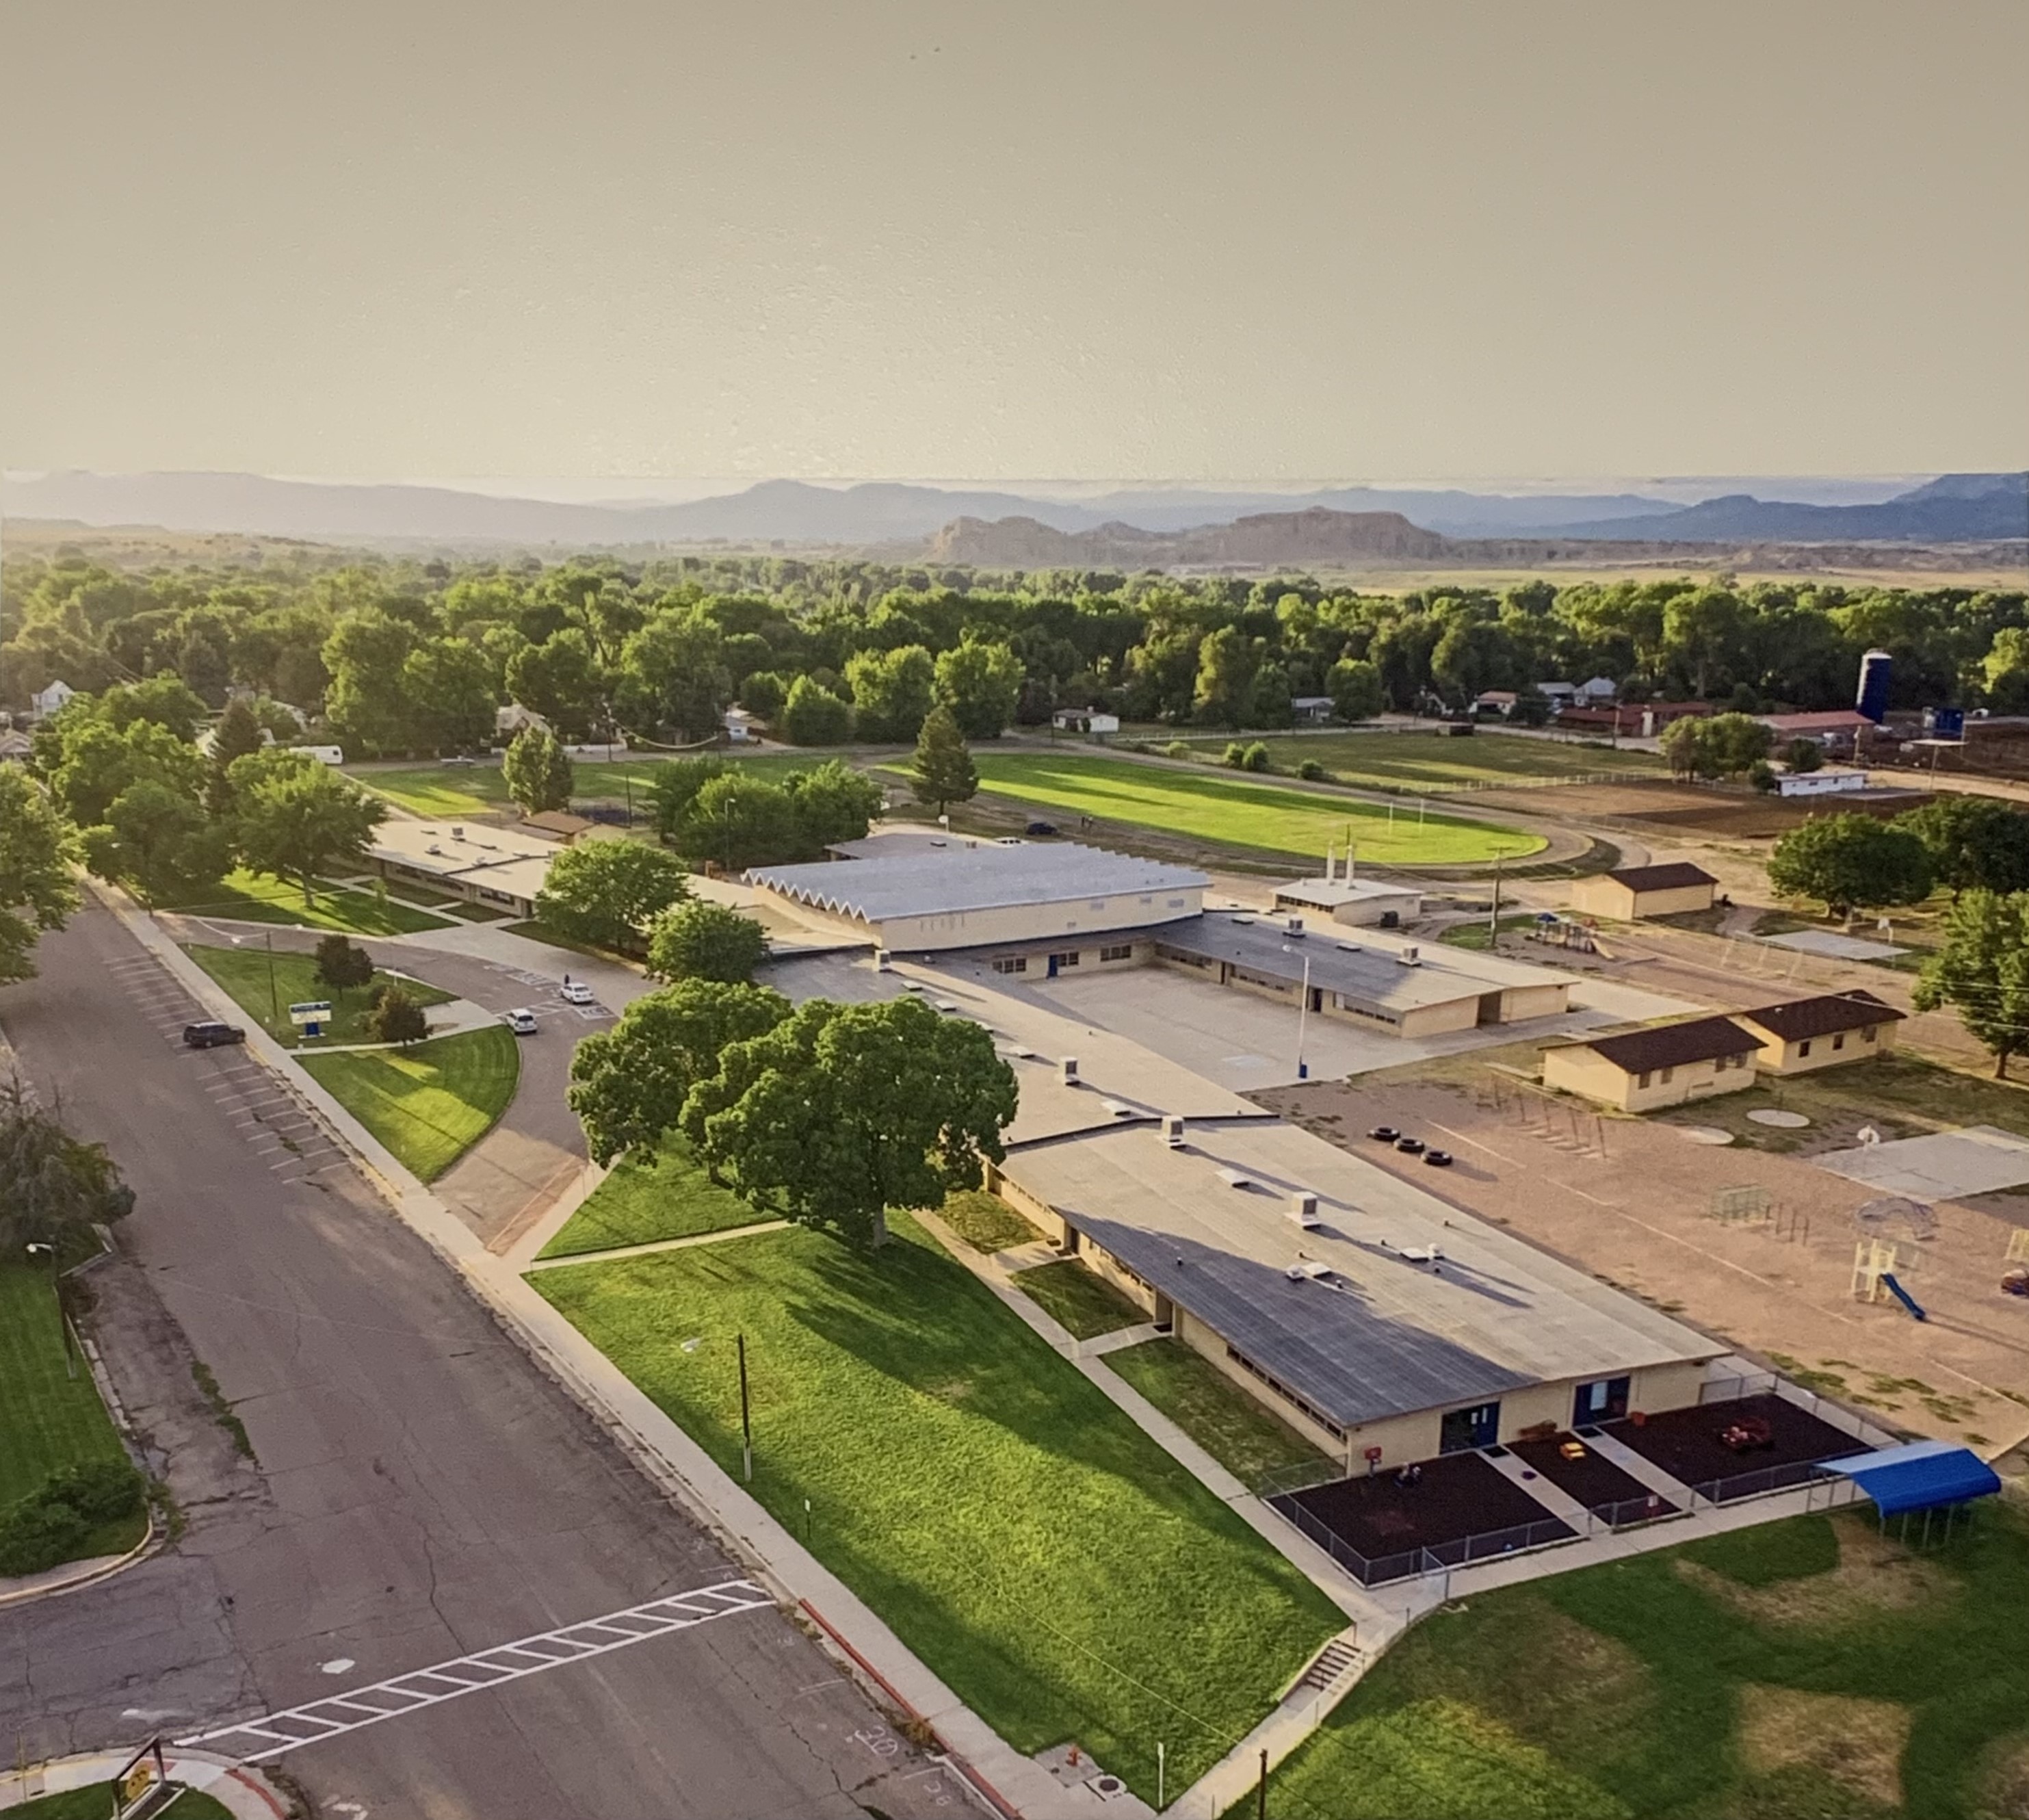 View of Fremont school from a drone